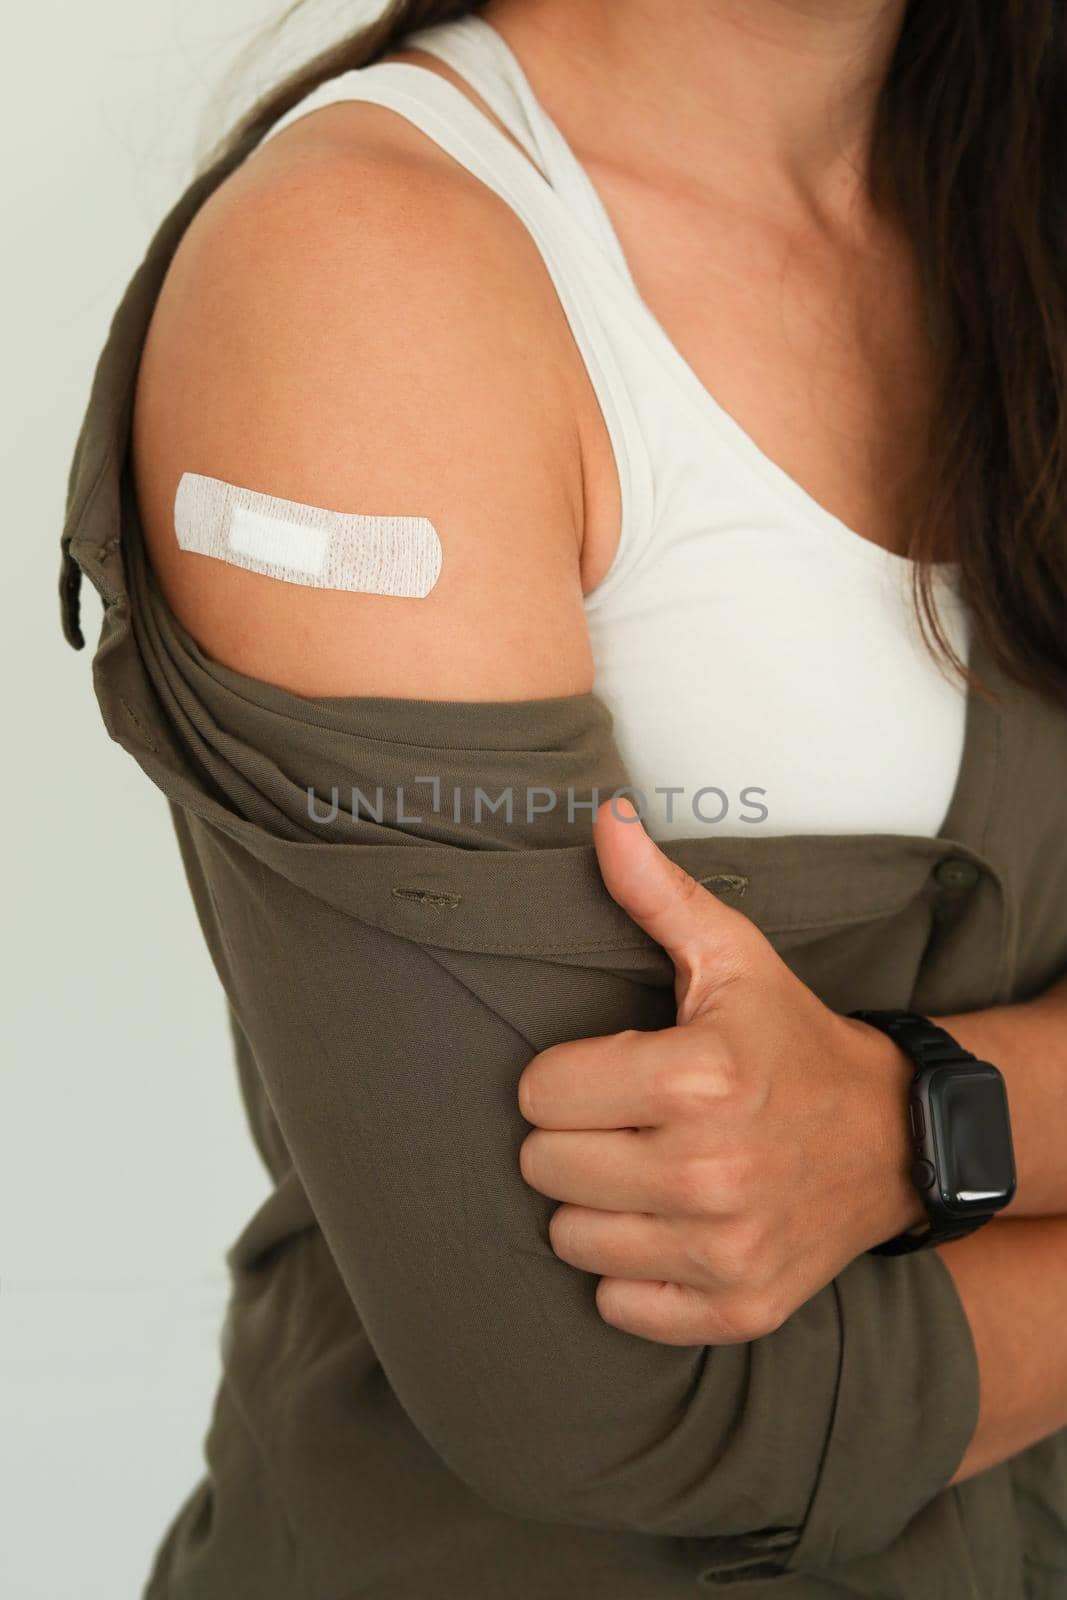 Coronavirus vaccination advertisement. Vaccinated woman showing arm with plaster bandage after Covid-19 vaccine injection. Concept of recommended inoculation, vaccination, vaccinated patient, vaccine. Close up.